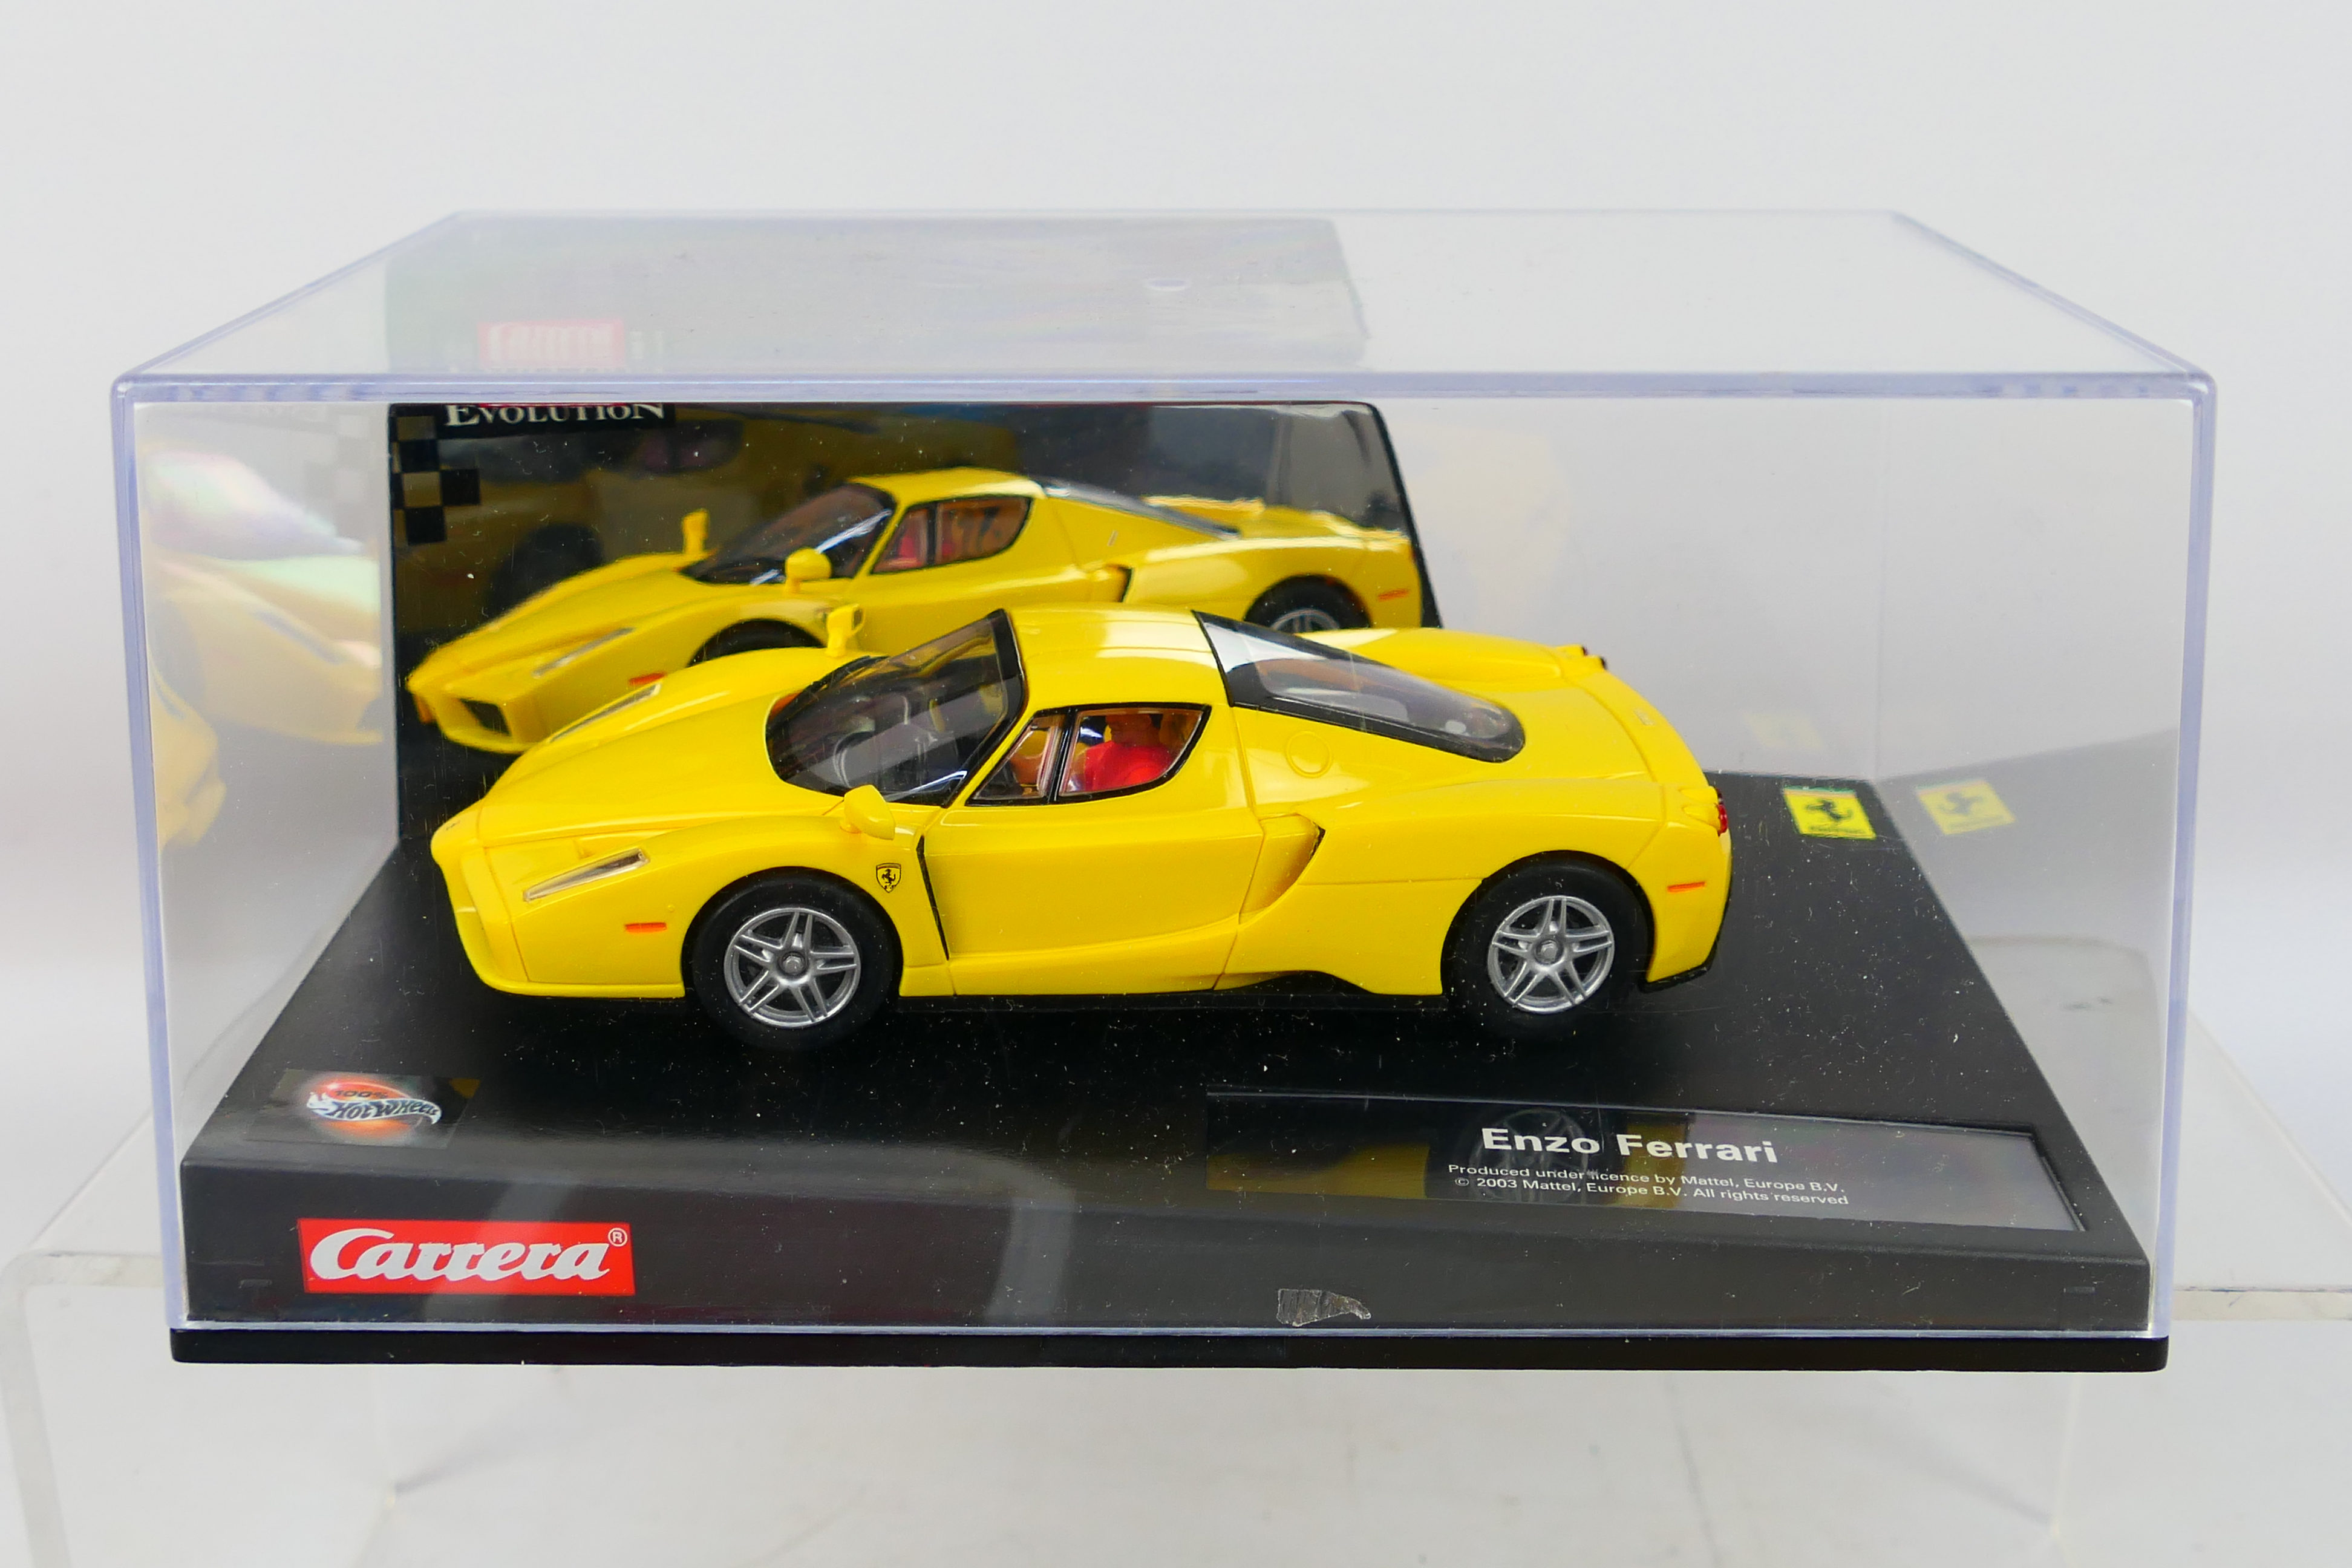 Scalextric - Carrear Four unboxed Scalextric slot cars with a boxed Carrera #25703 Ferrari Enzo - Image 4 of 4